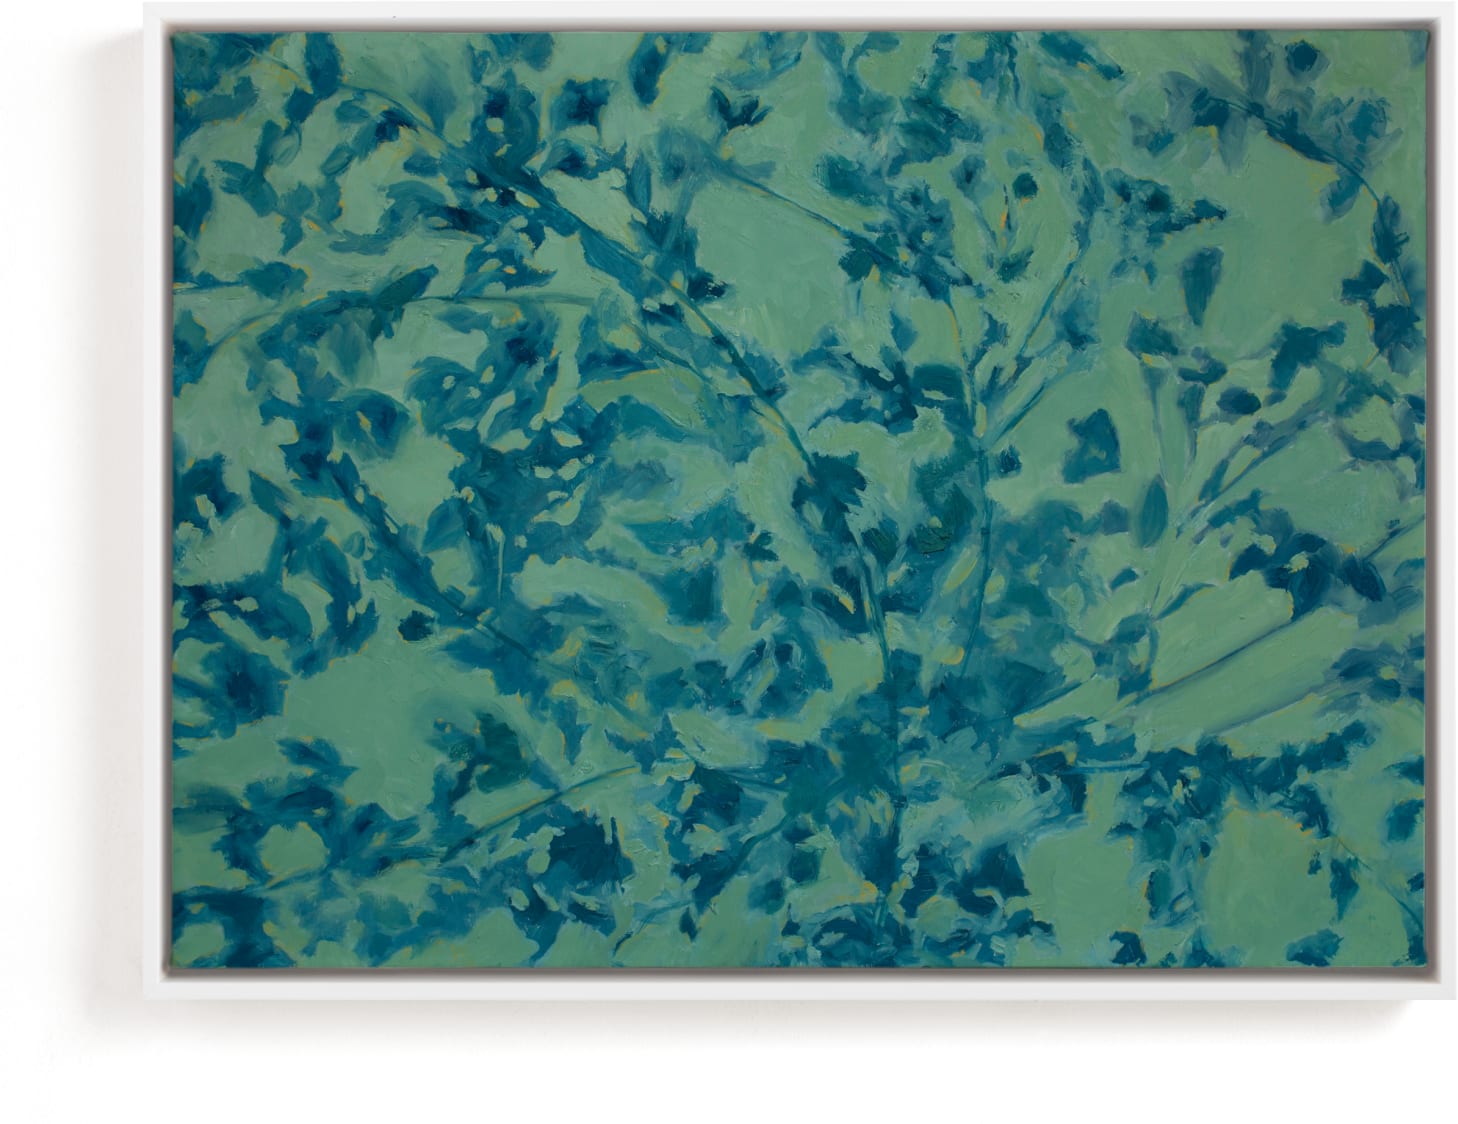 This is a blue art by Alysia Quisenberry called Shifting: Spring.